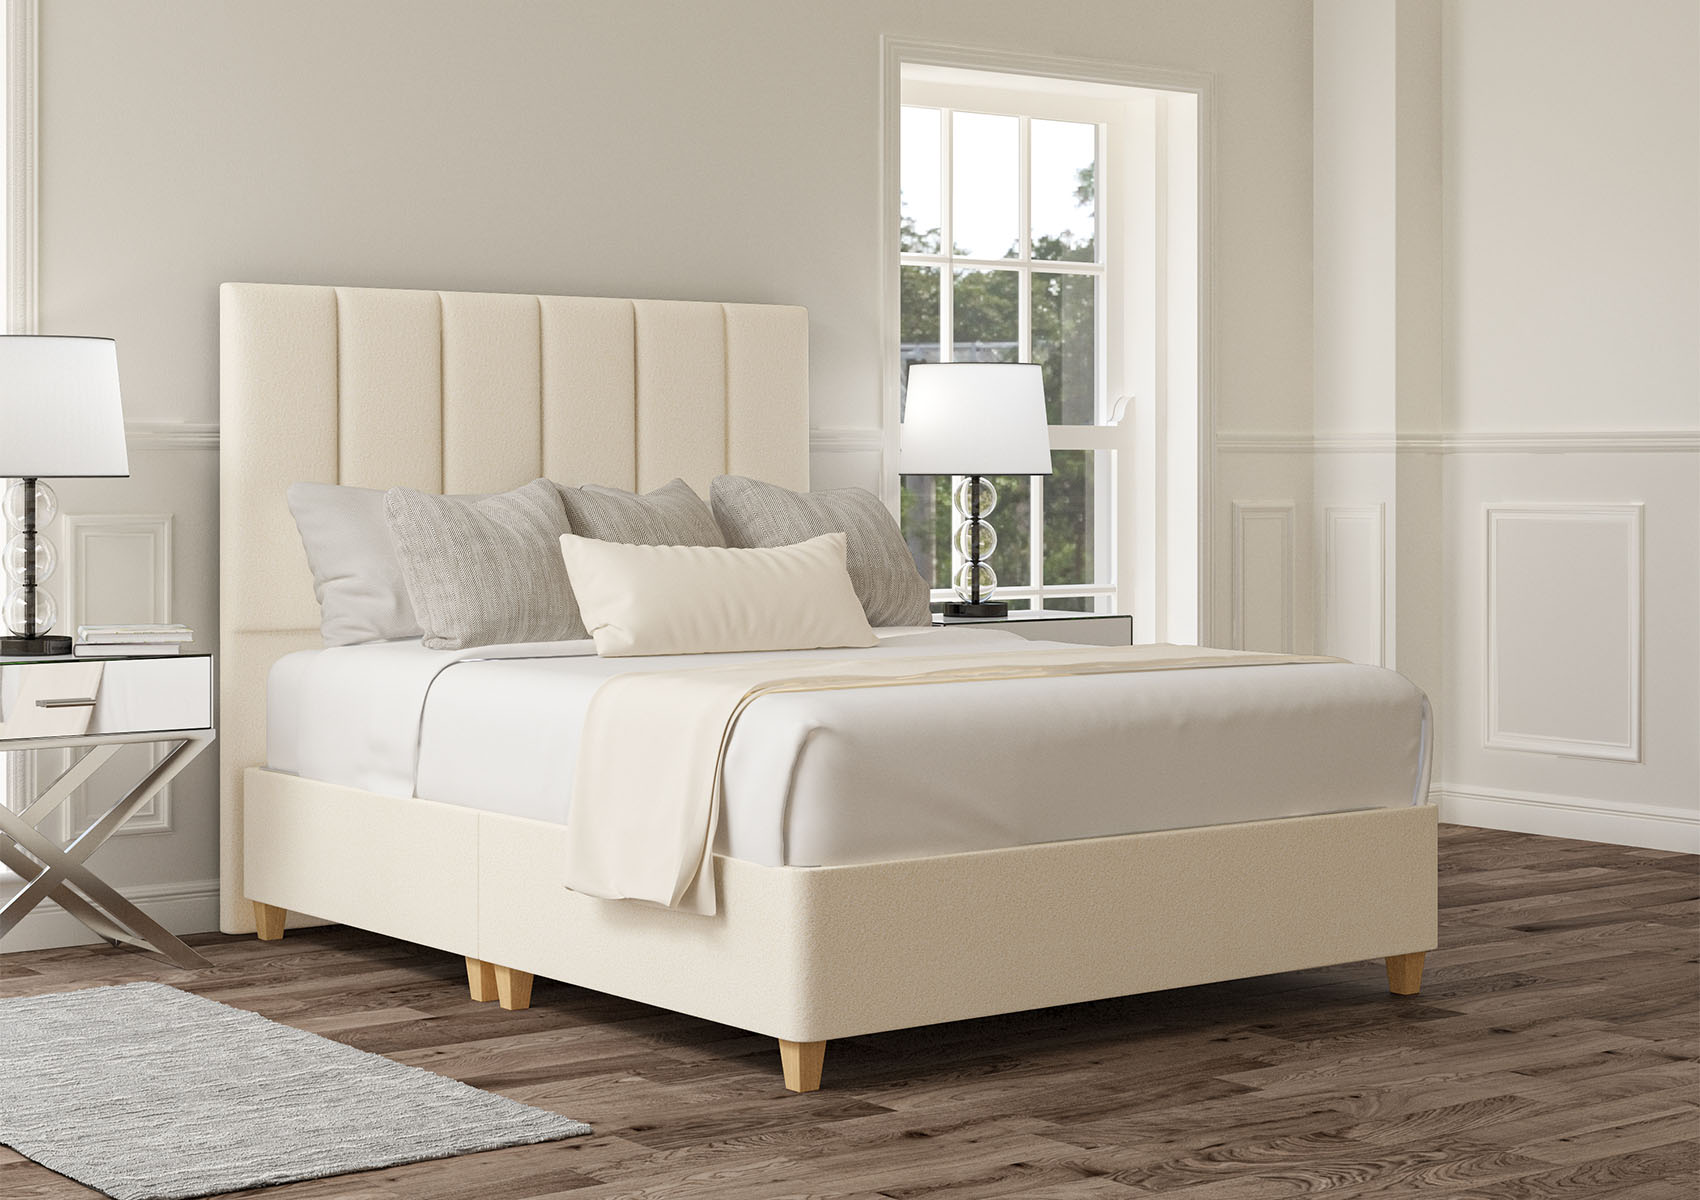 View Empire Teddy Cream Upholstered Super King Divan Bed Time4Sleep information